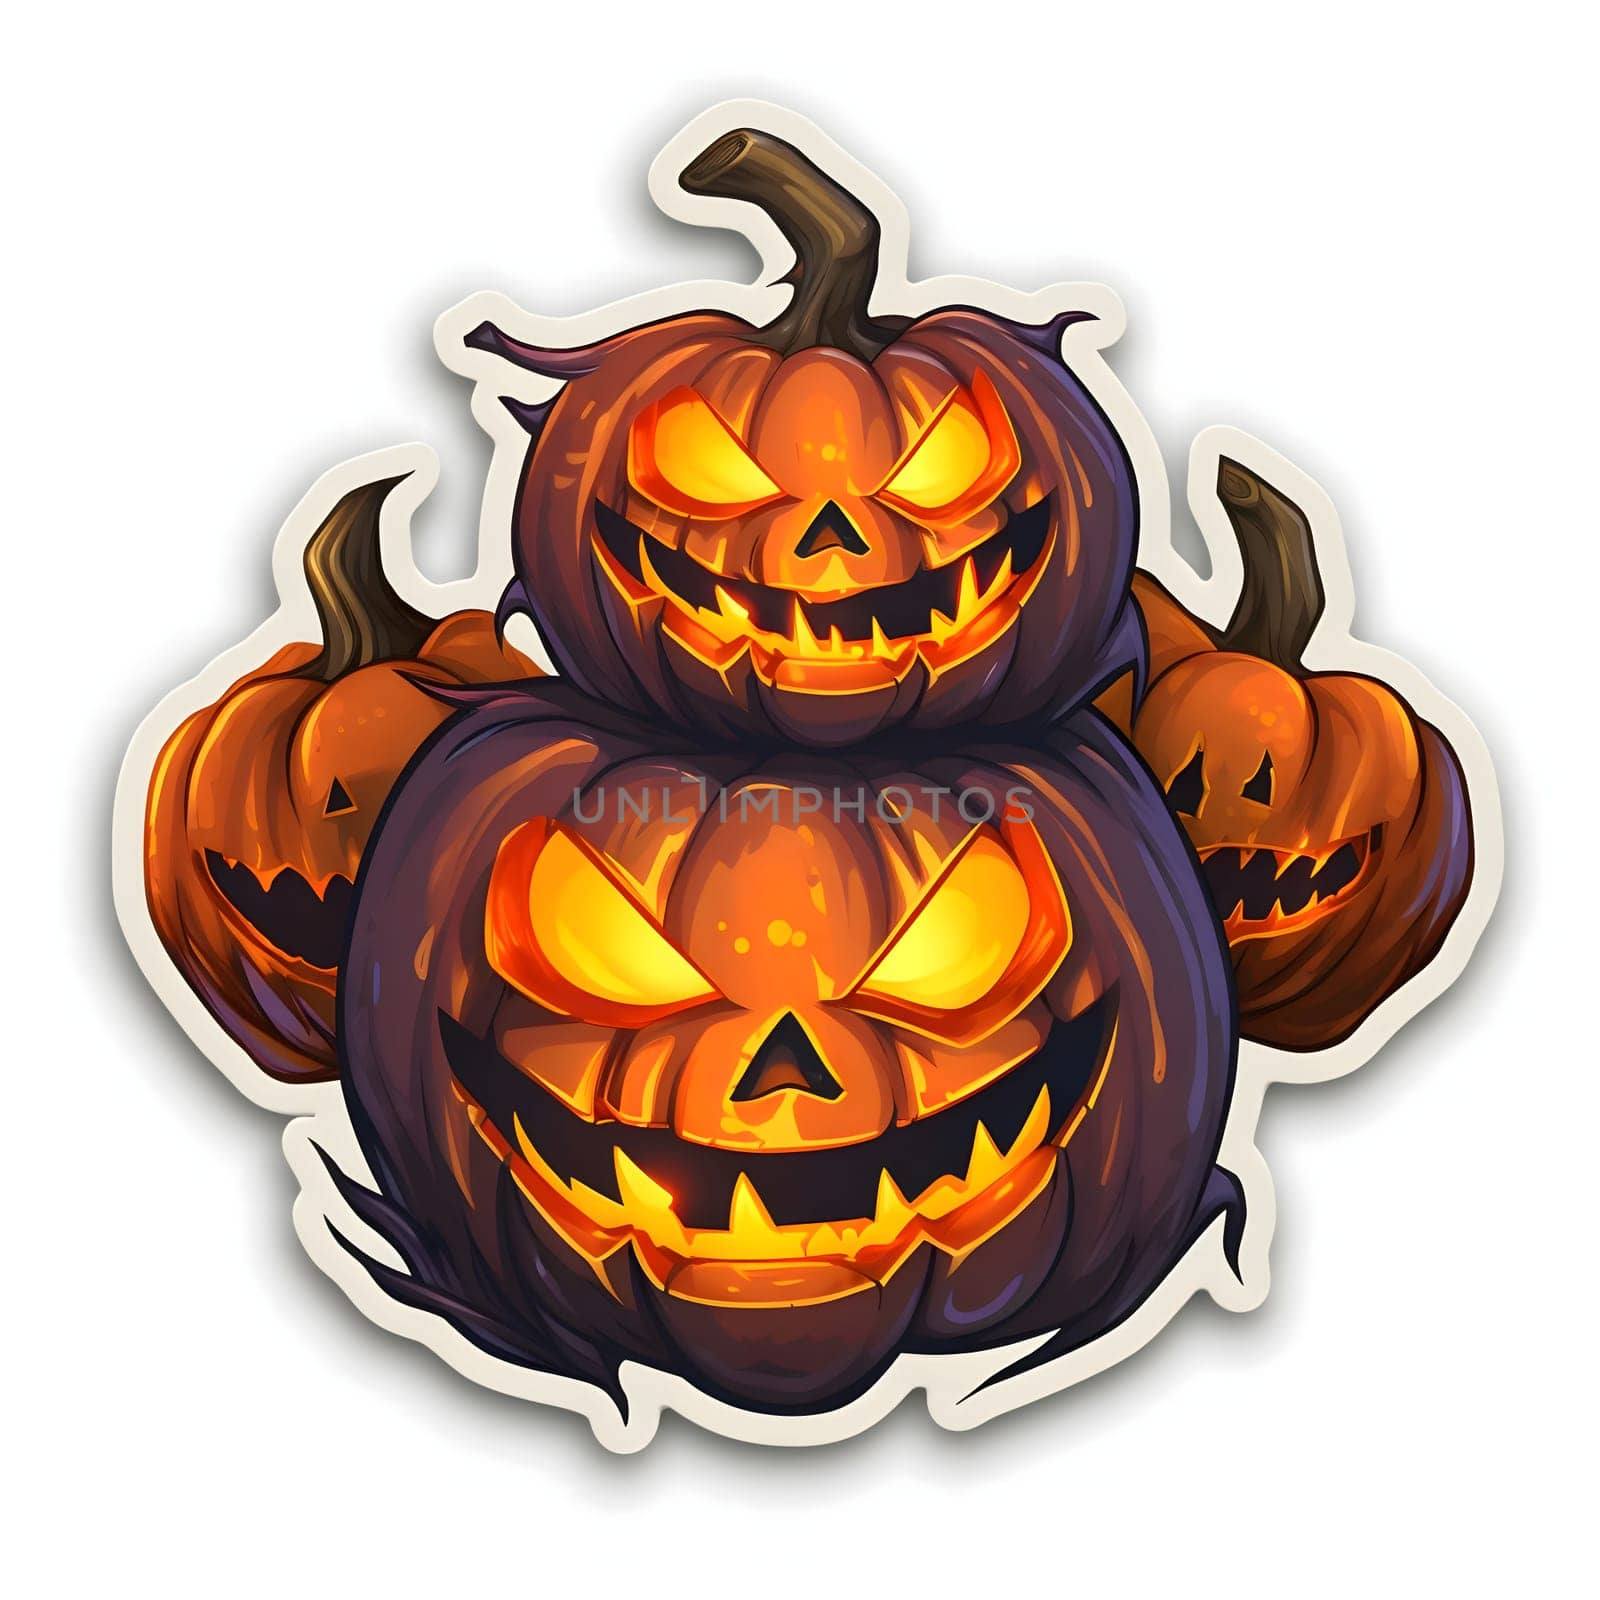 Sticker four jack-o-lantern pumpkins, a Halloween image on a white isolated background. Atmosphere of darkness and fear.